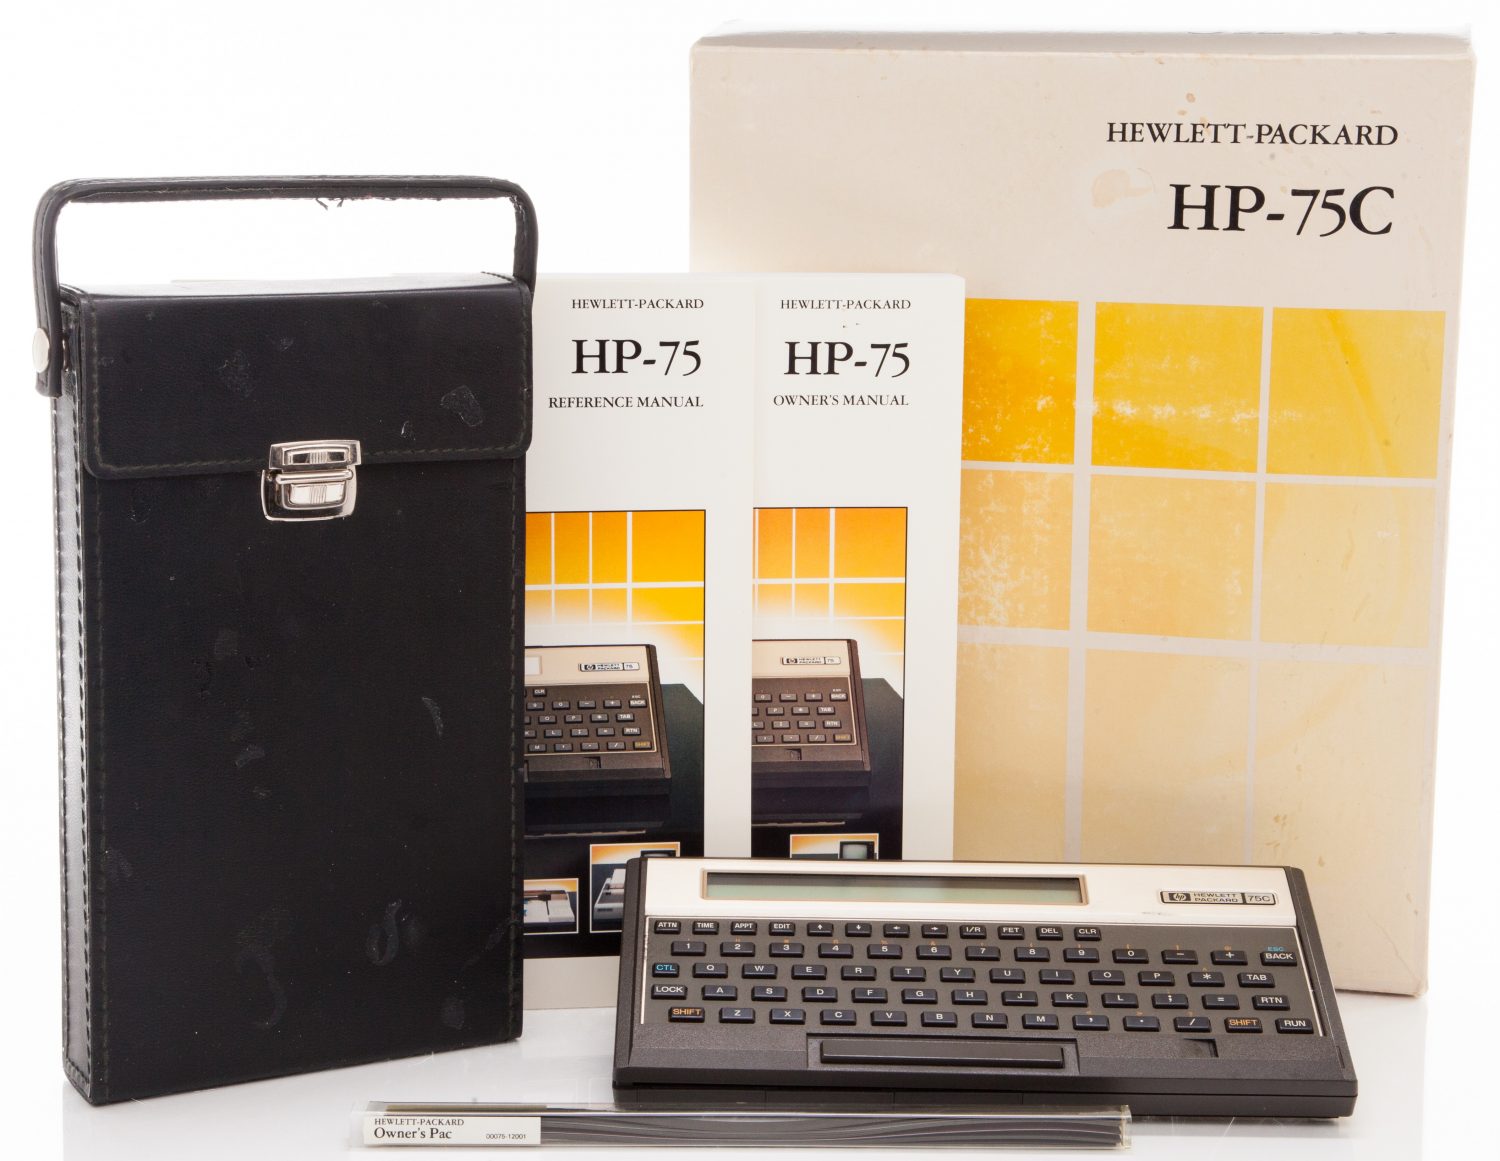 Photo of the HP 75C including carrying case, reference manual and owner's manual.